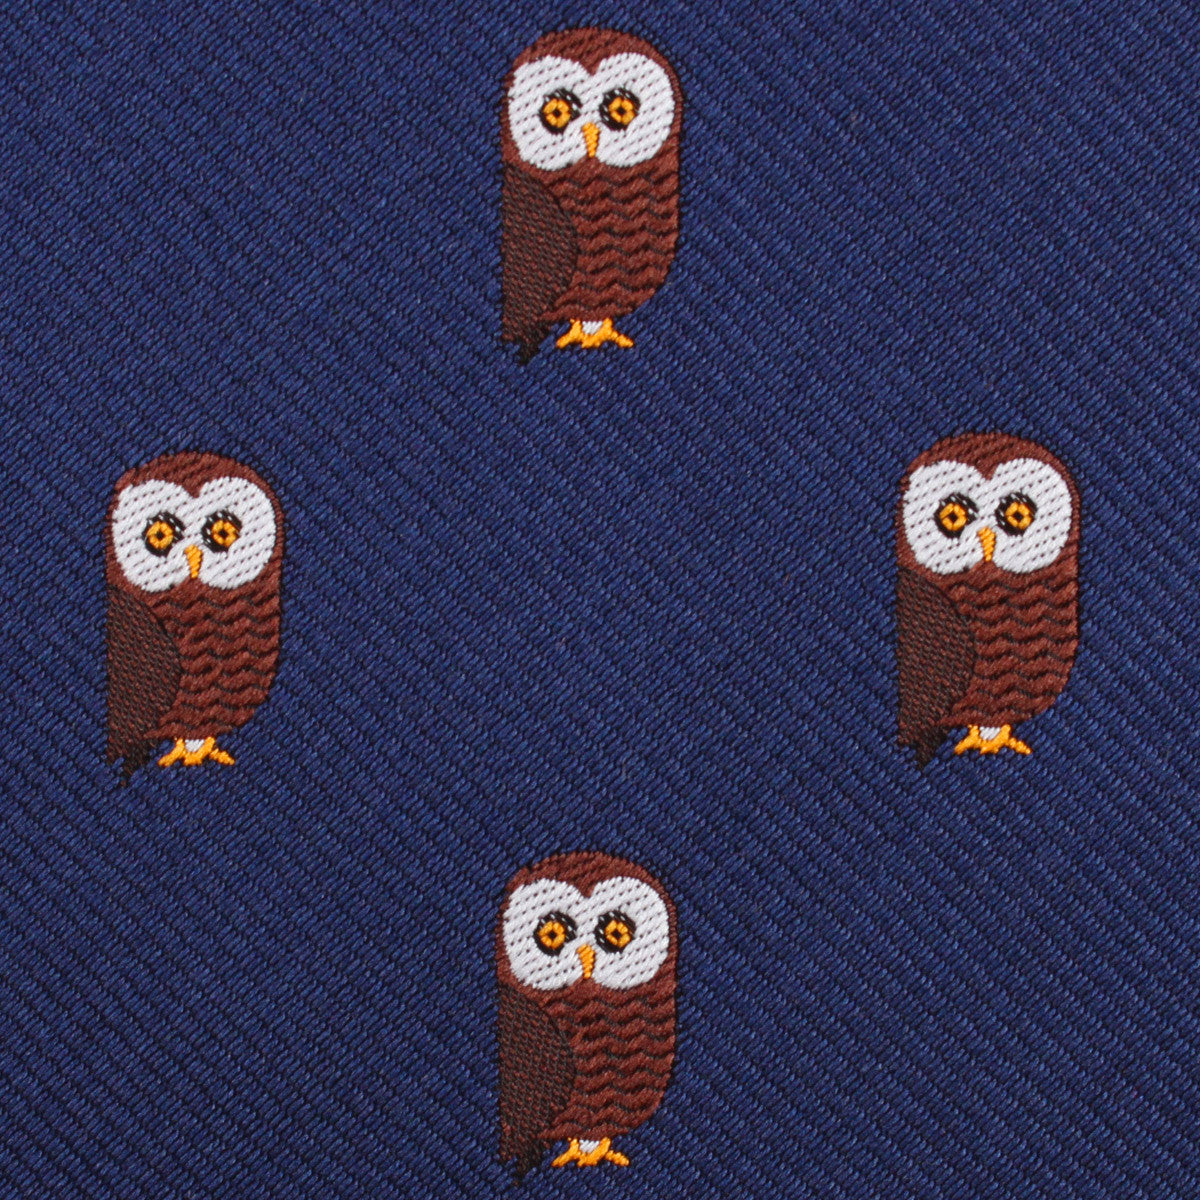 Northern Brown Owl Fabric Pocket Square